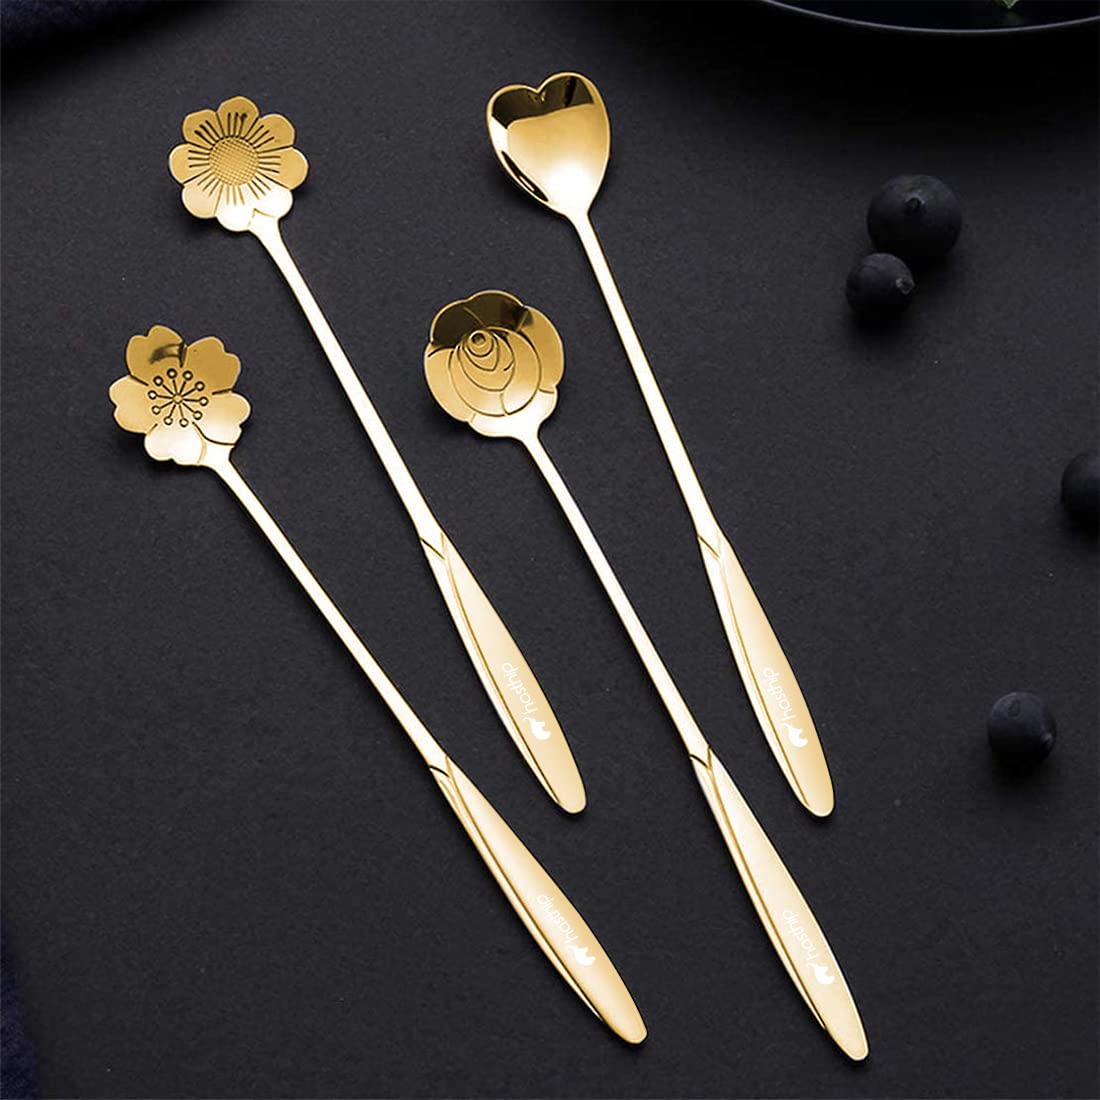 HASTHIP? Golden Spoon Set/Coffee Spoon/Dessert Spoon/Cutlery Kitchen Tableware/Stainless Steel Gold Flower Shape Coffee Spoon with Package Bag, 18cm, 4 Pcs Different Coffee Spoon